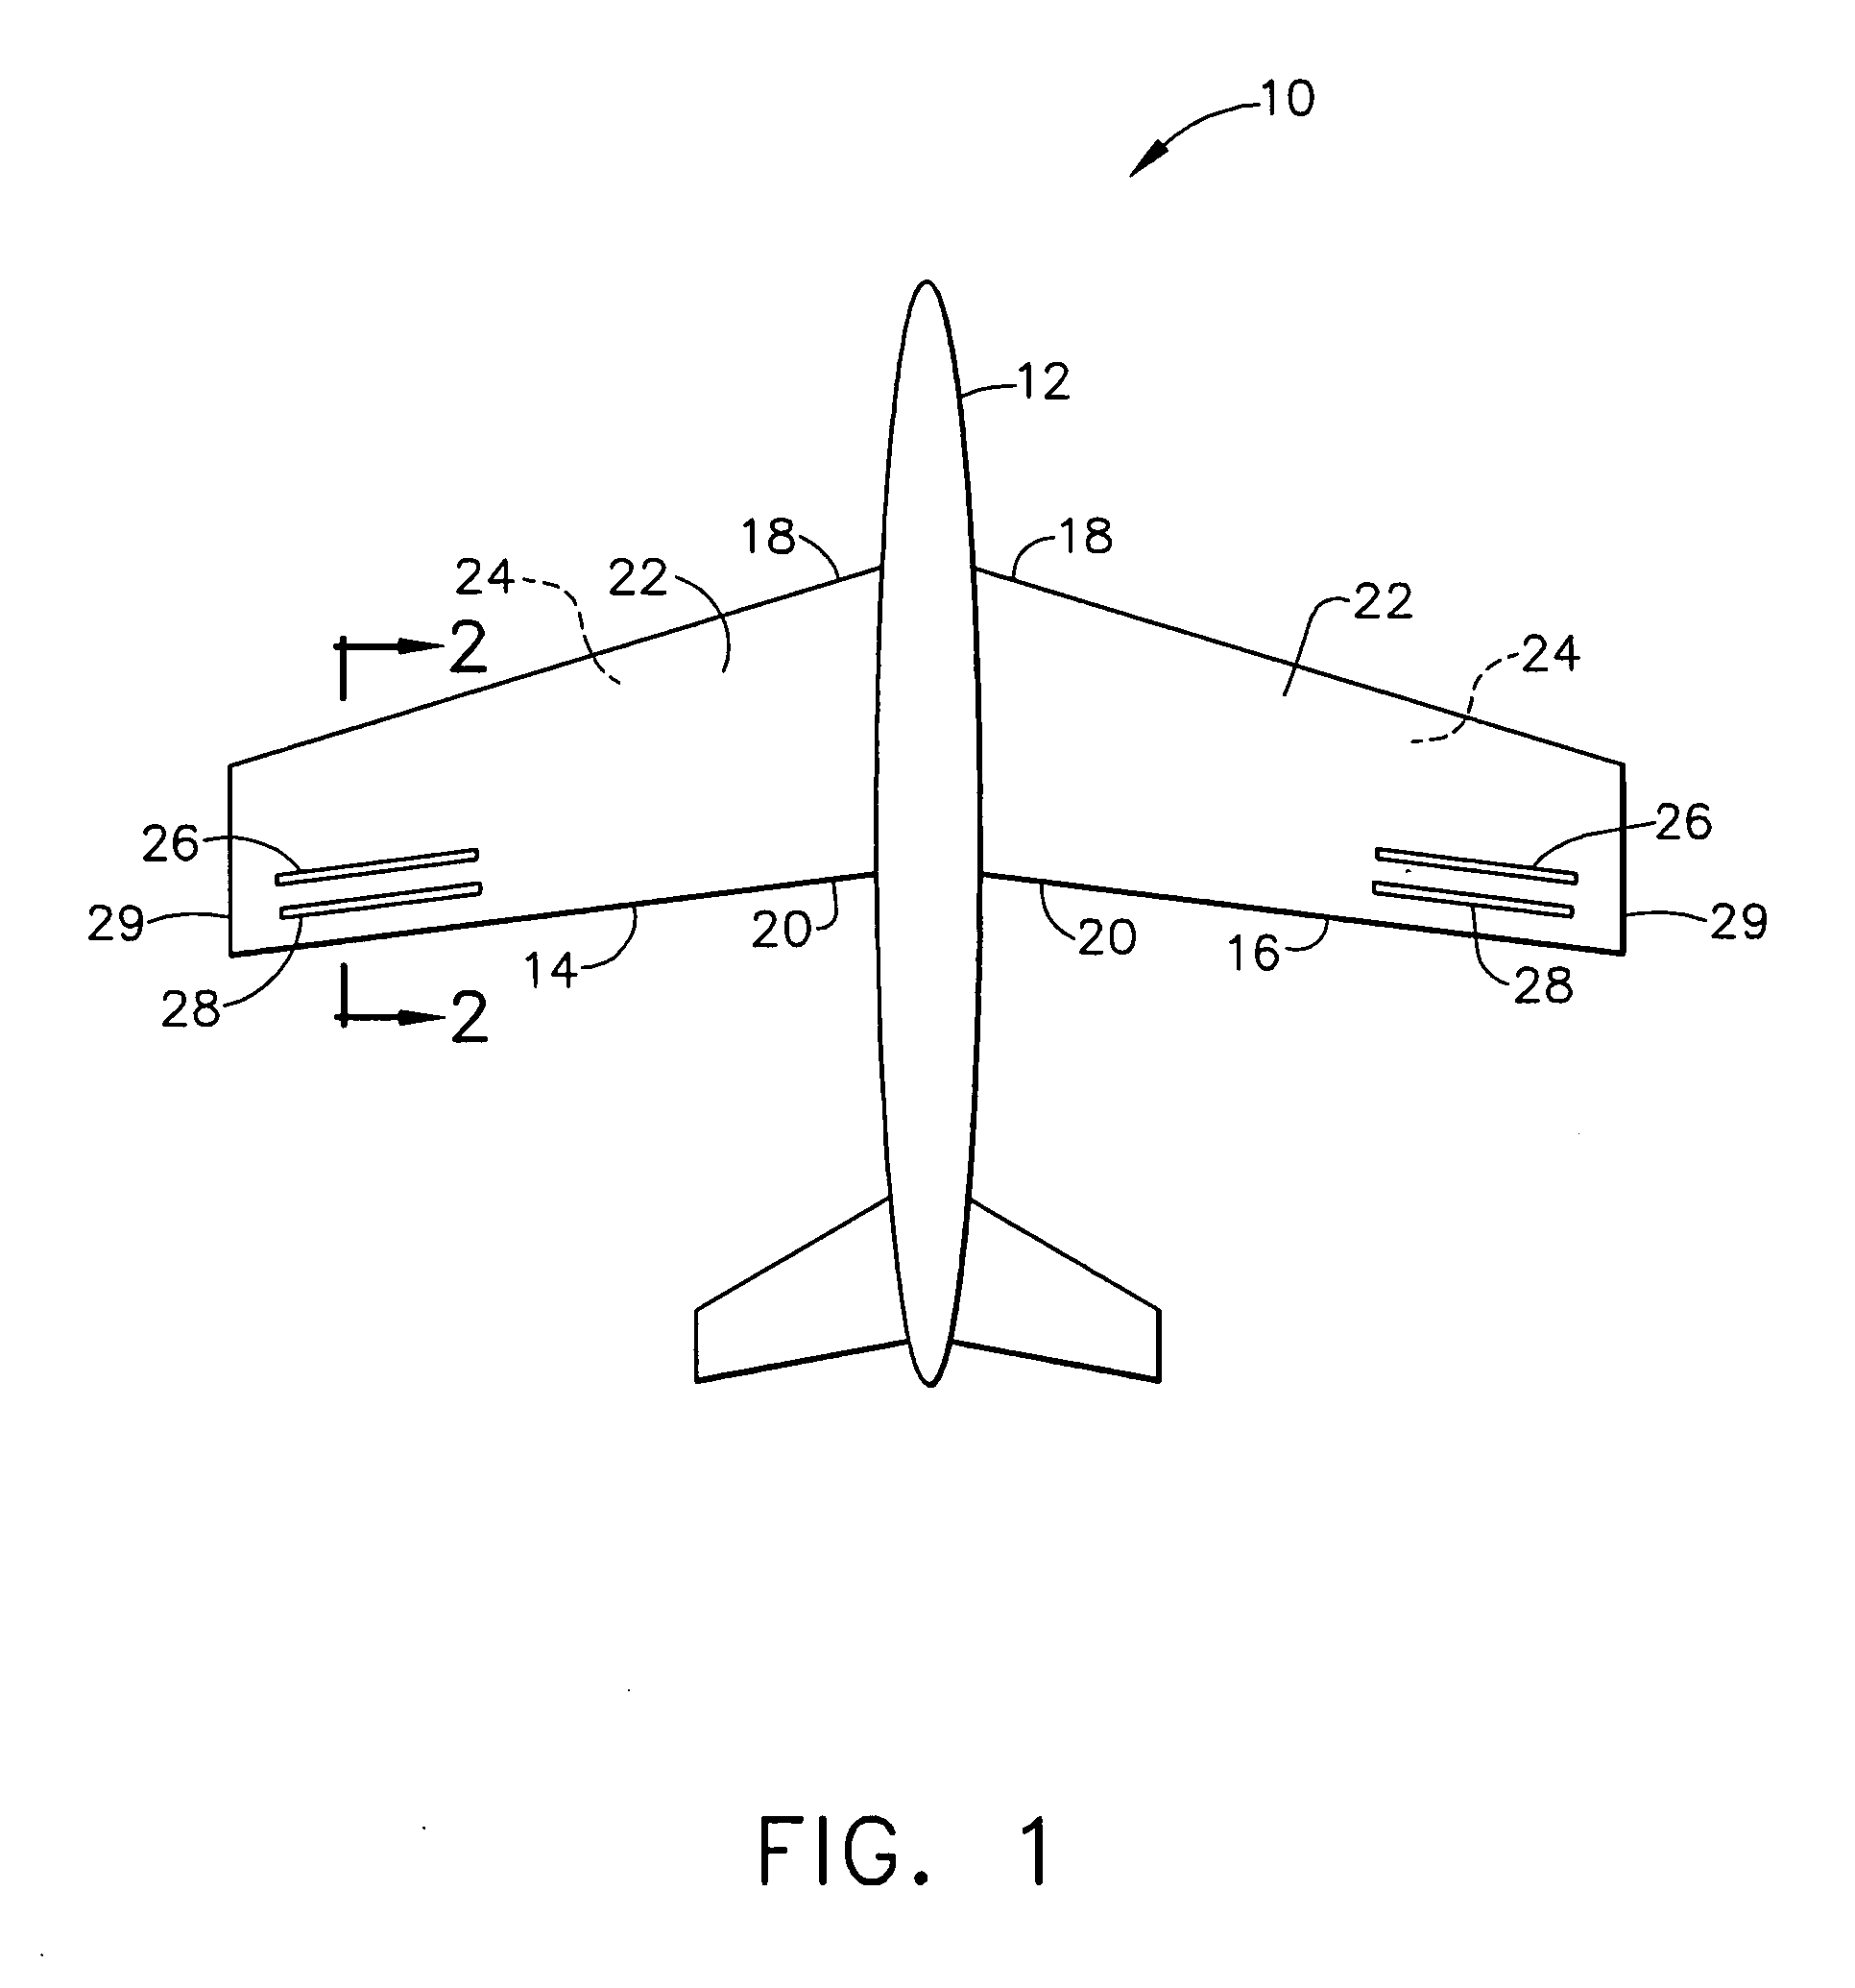 Dual point active flow control system for controlling air vehicle attitude during transonic flight